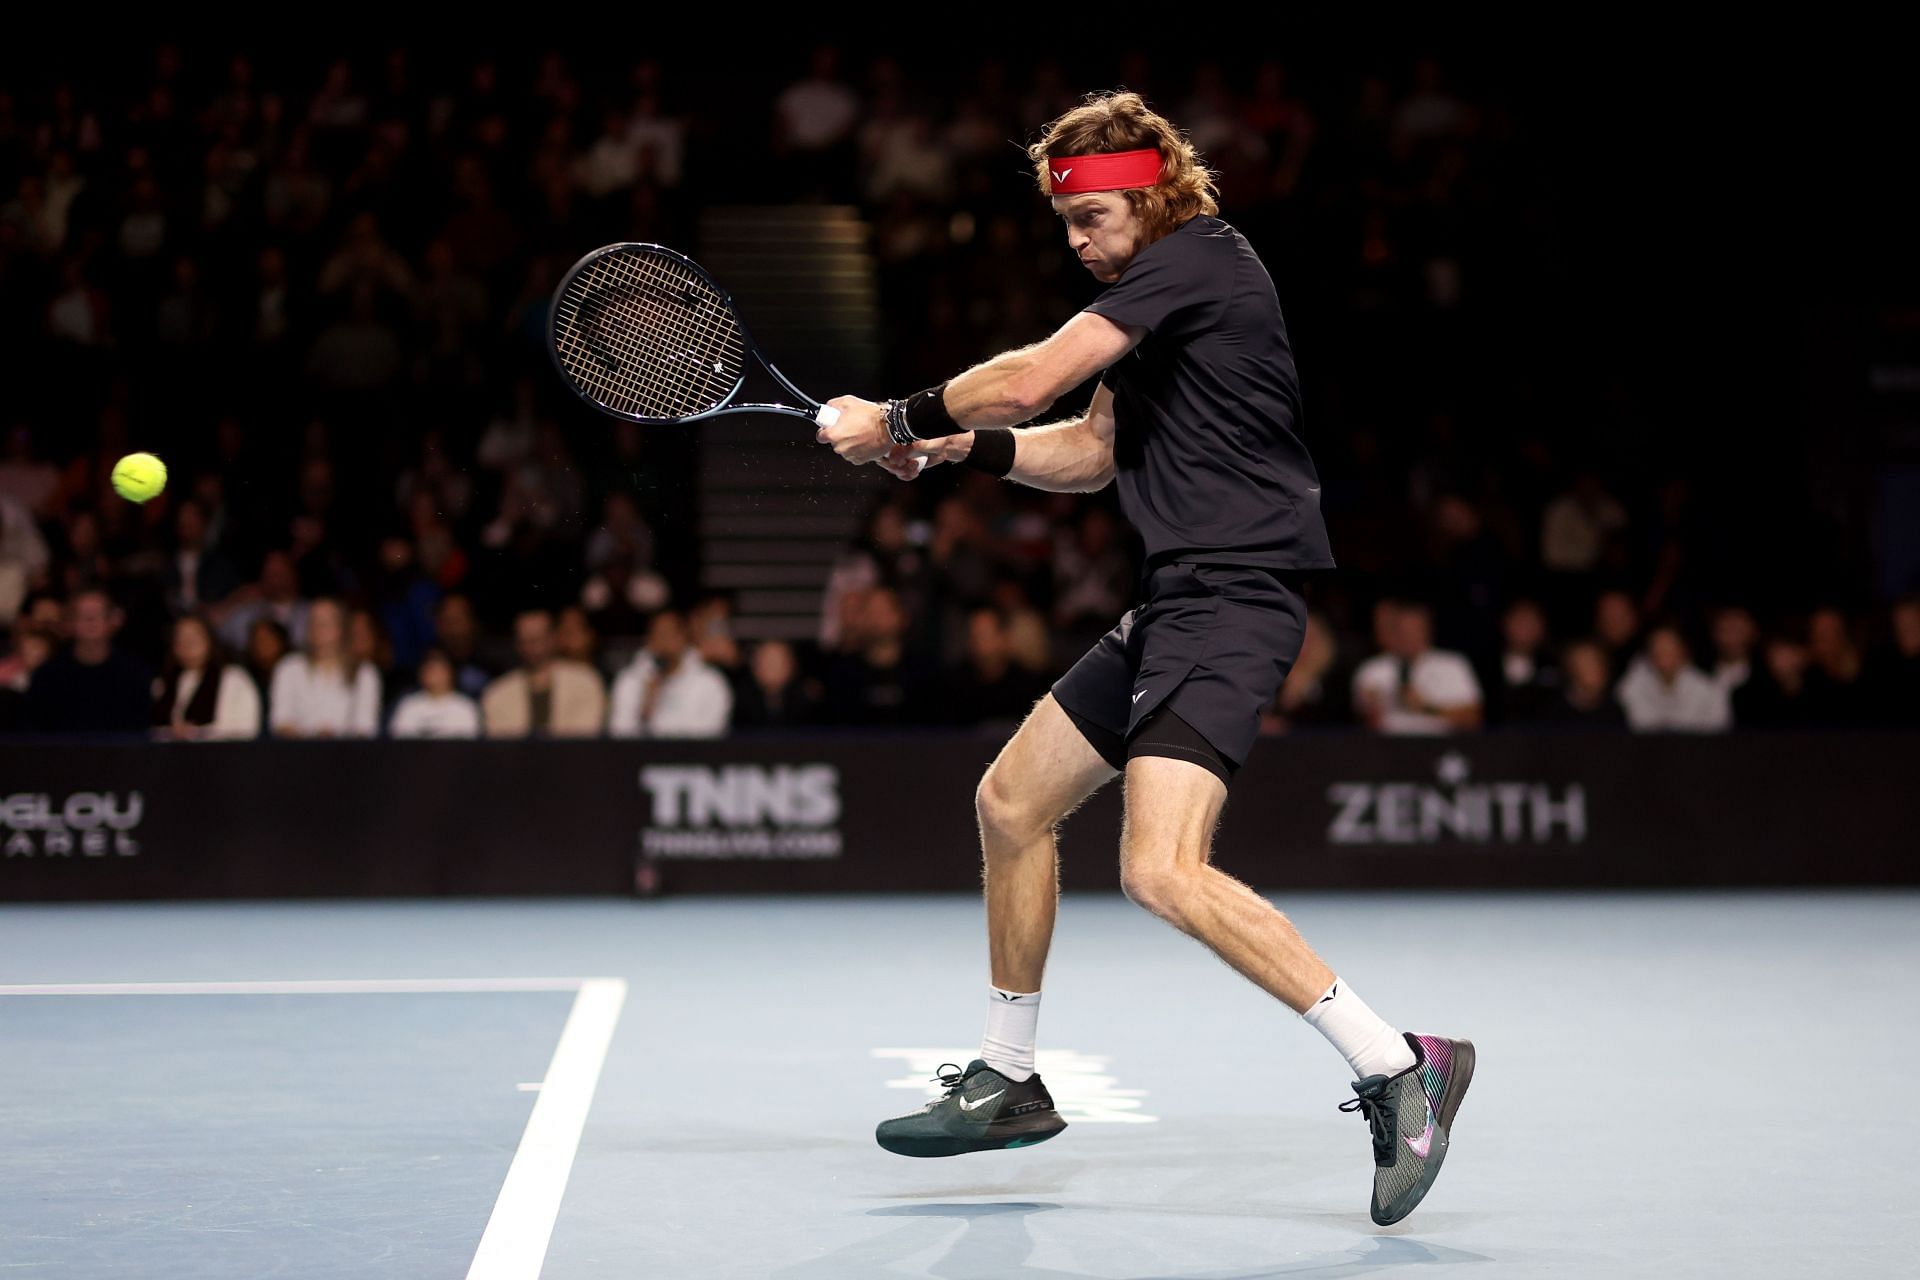 Andrey Rublev in action at the Ultimate Tennis Showdown in London